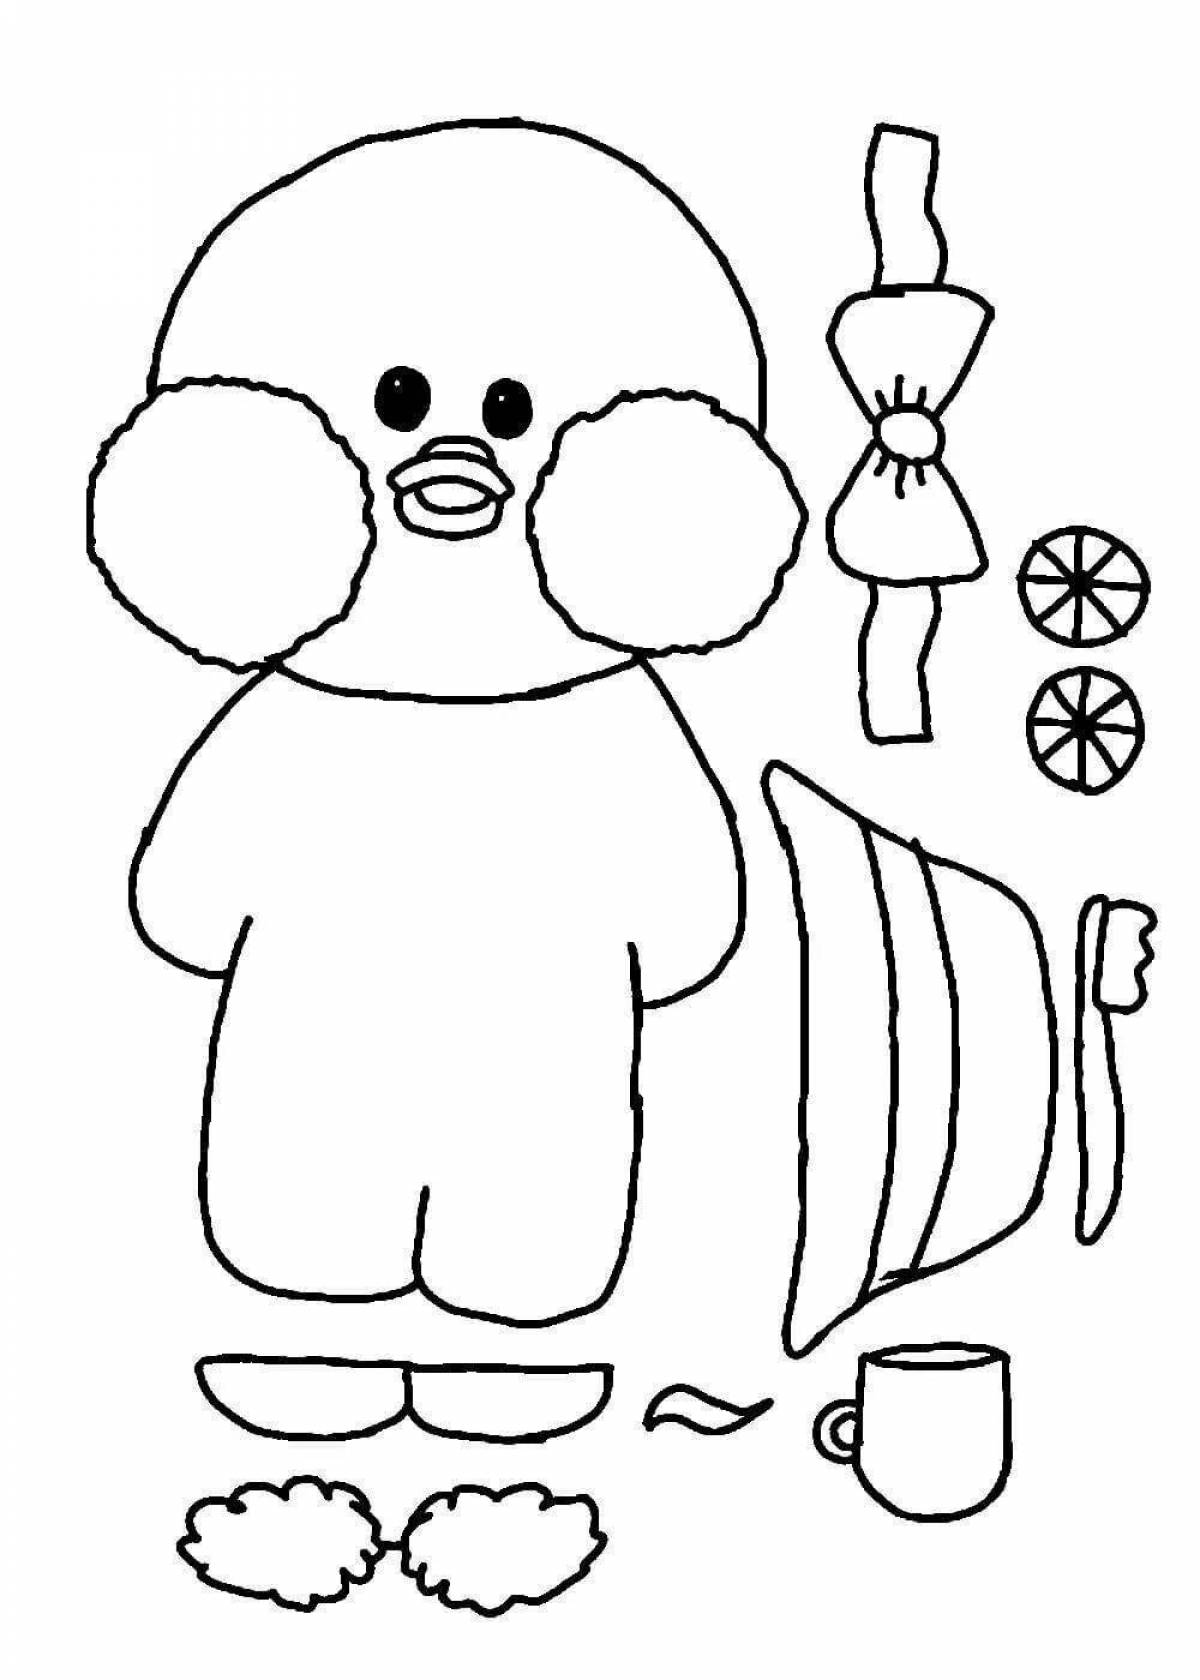 Coloring page fashion dressed duck